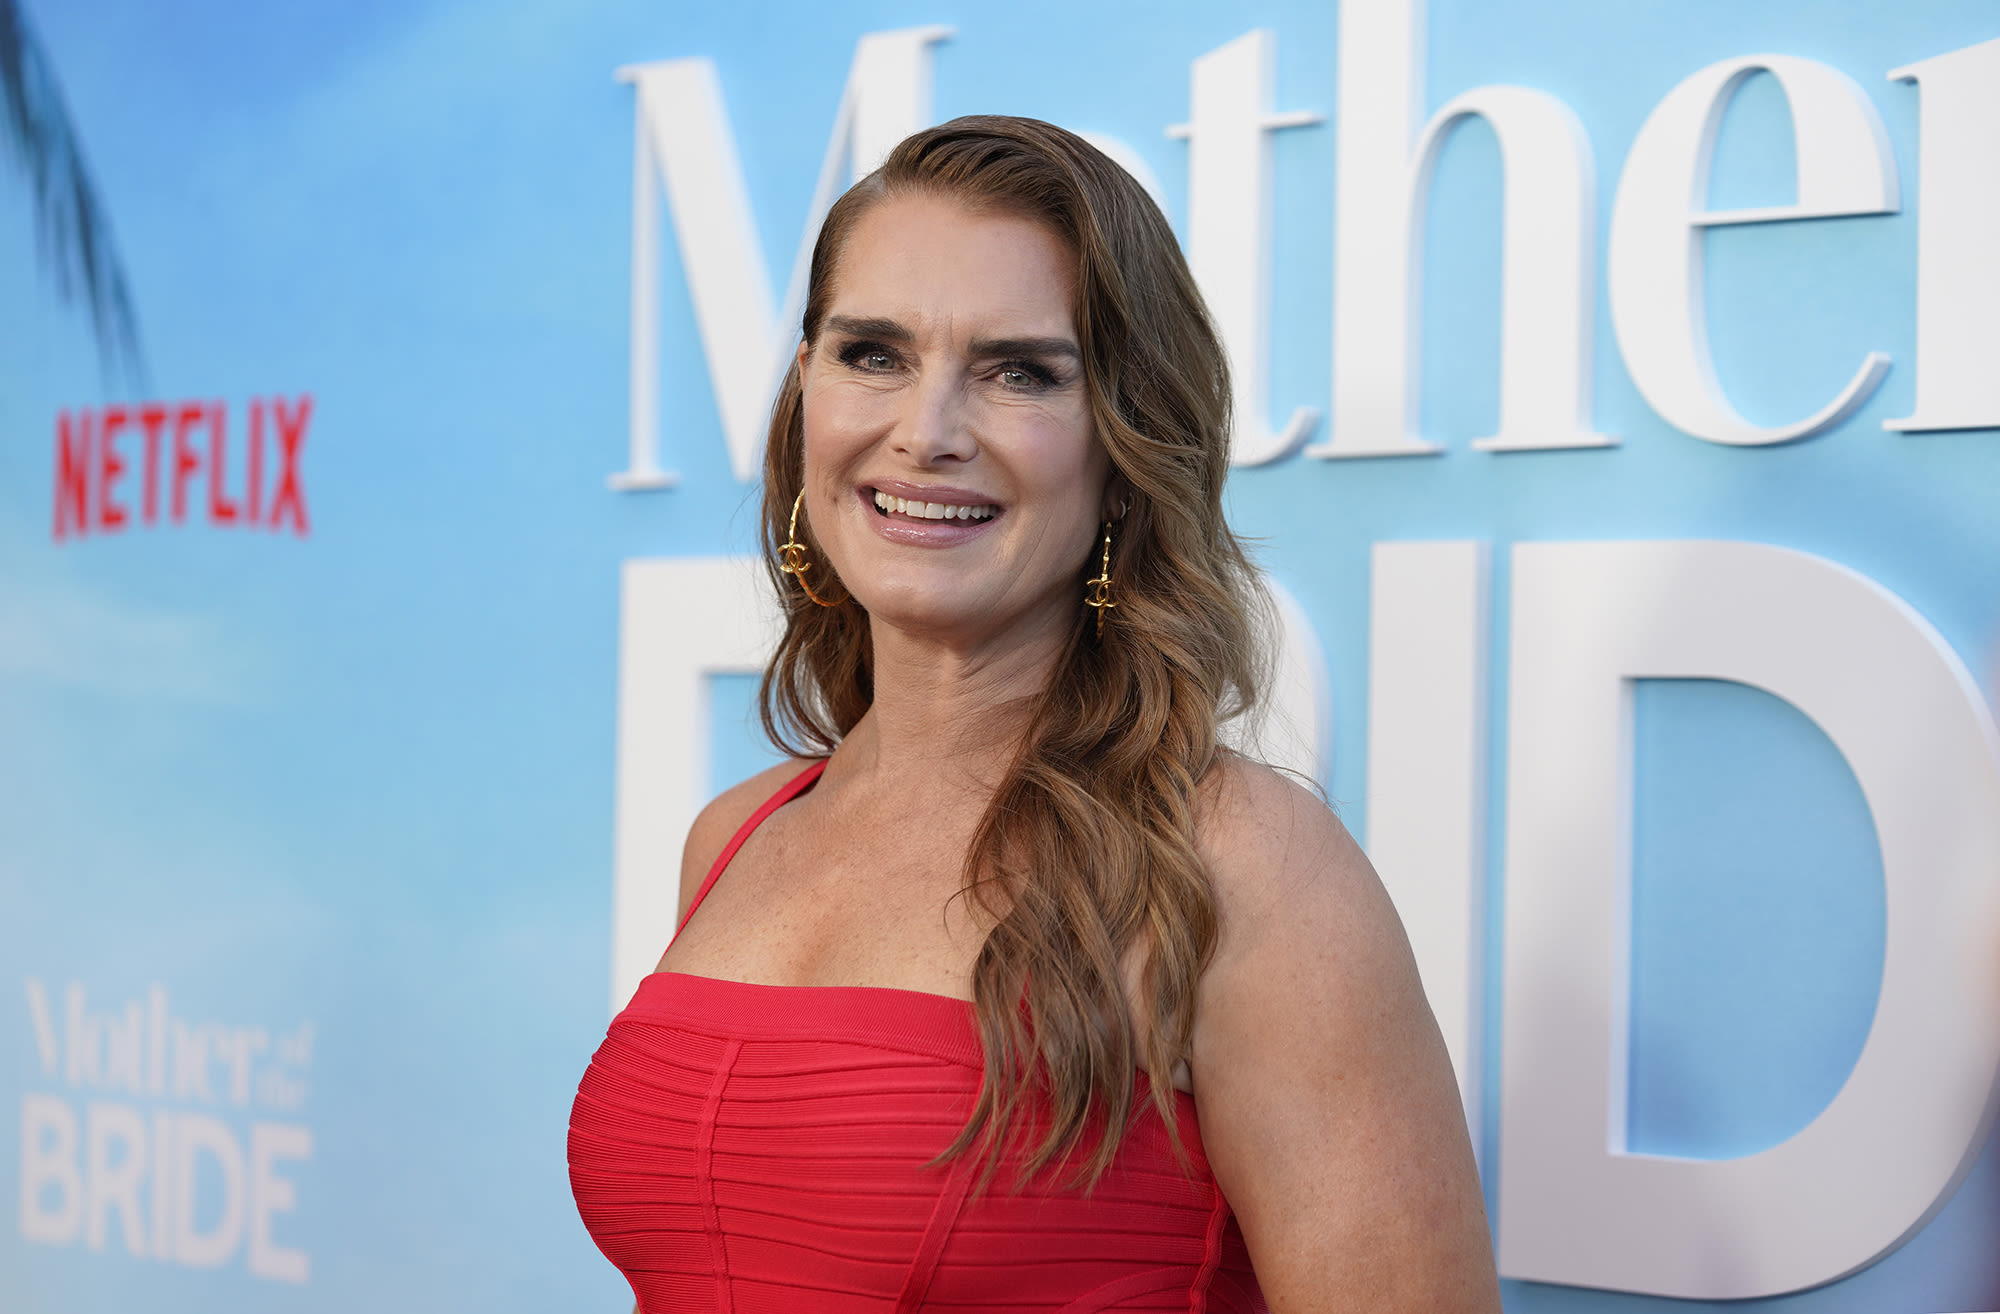 Brooke Shields ‘Always’ Picks Up These $5 Wax Strips When There’s No Time for a Bikini Wax